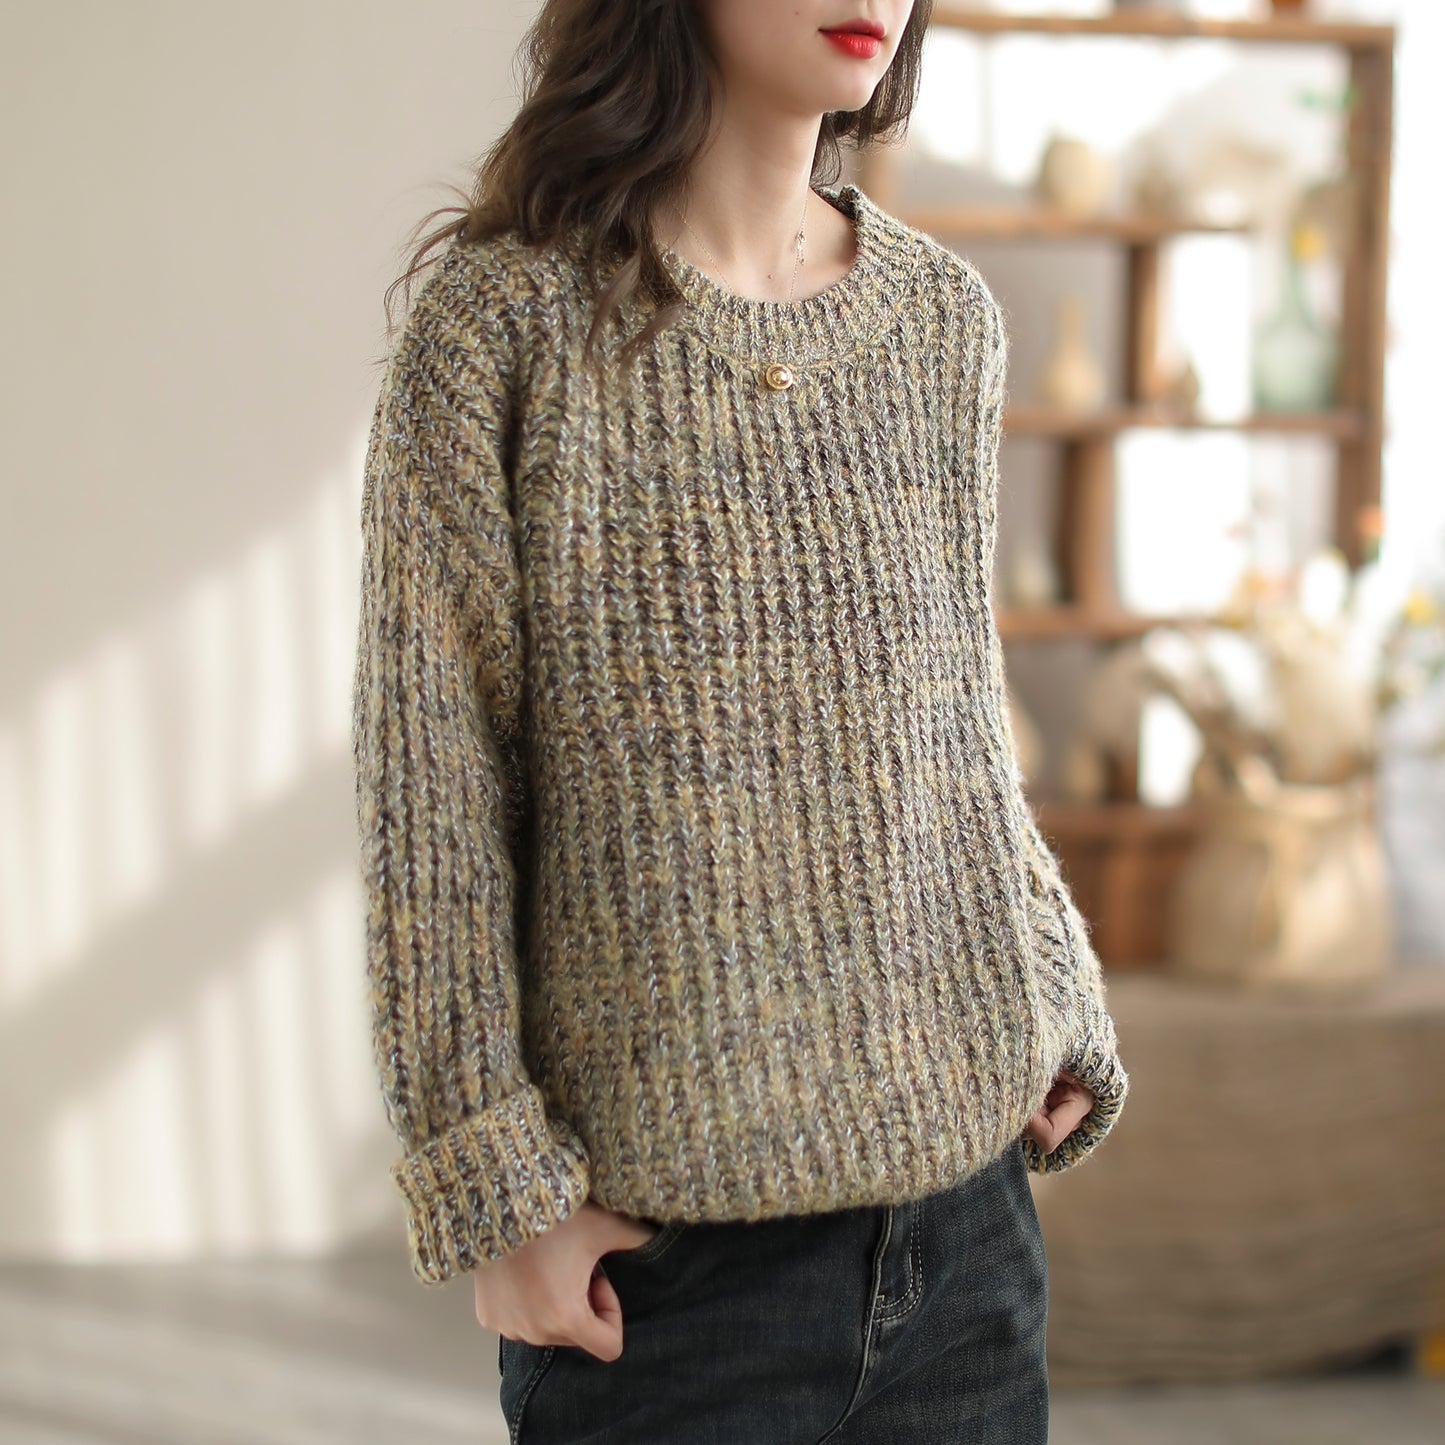 6% Wool And Alpaca Blend Solid Color Sweater